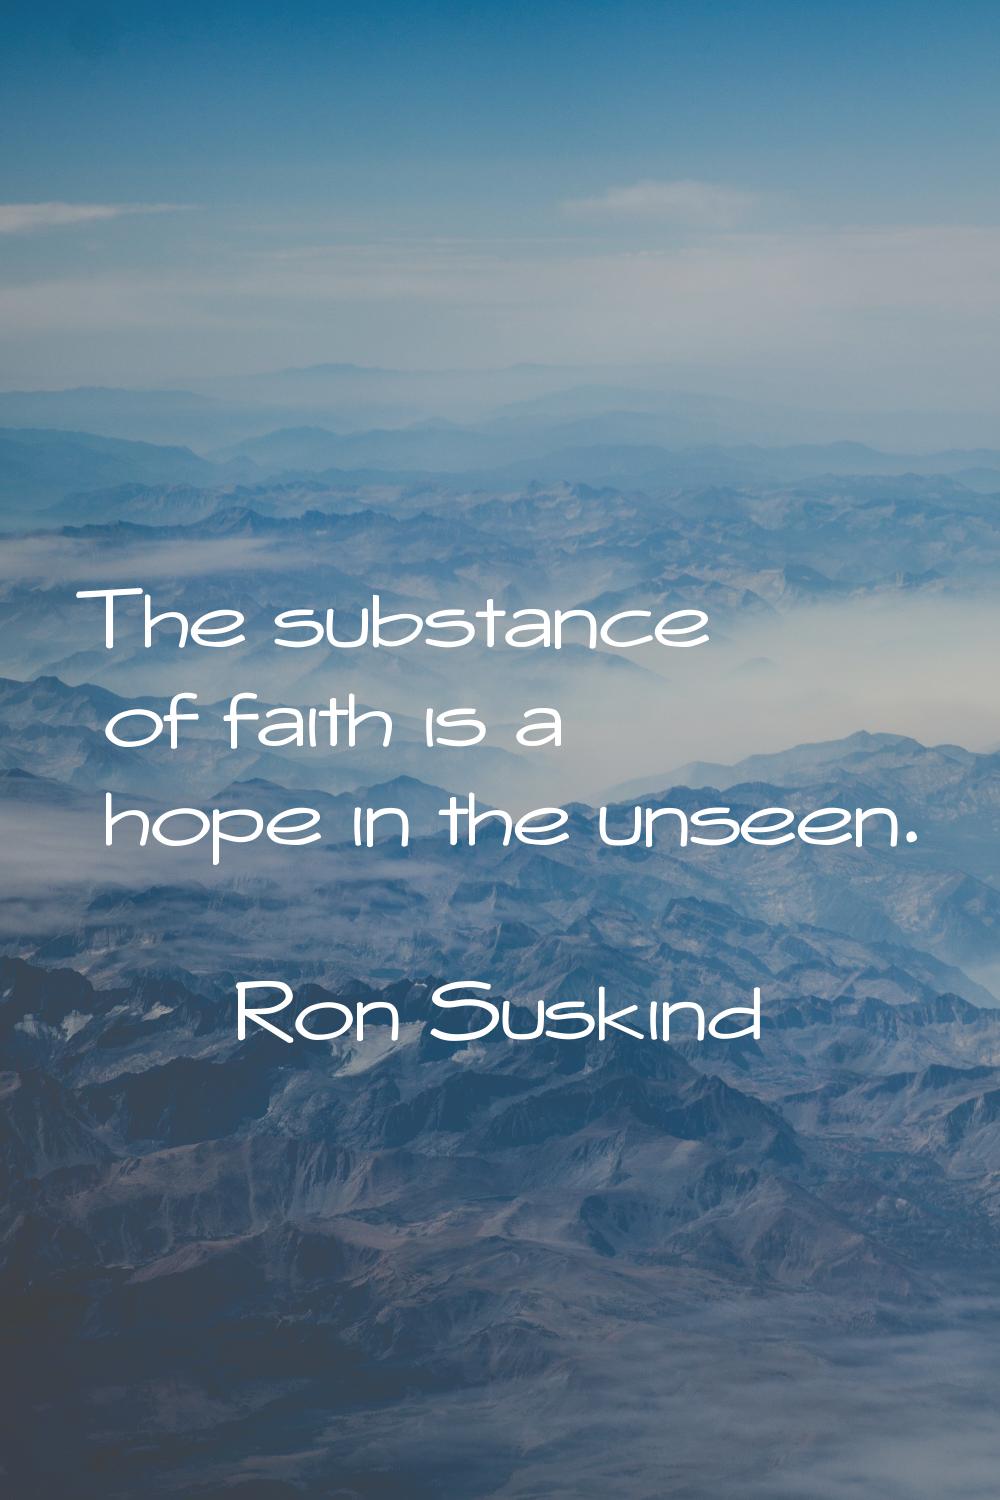 The substance of faith is a hope in the unseen.